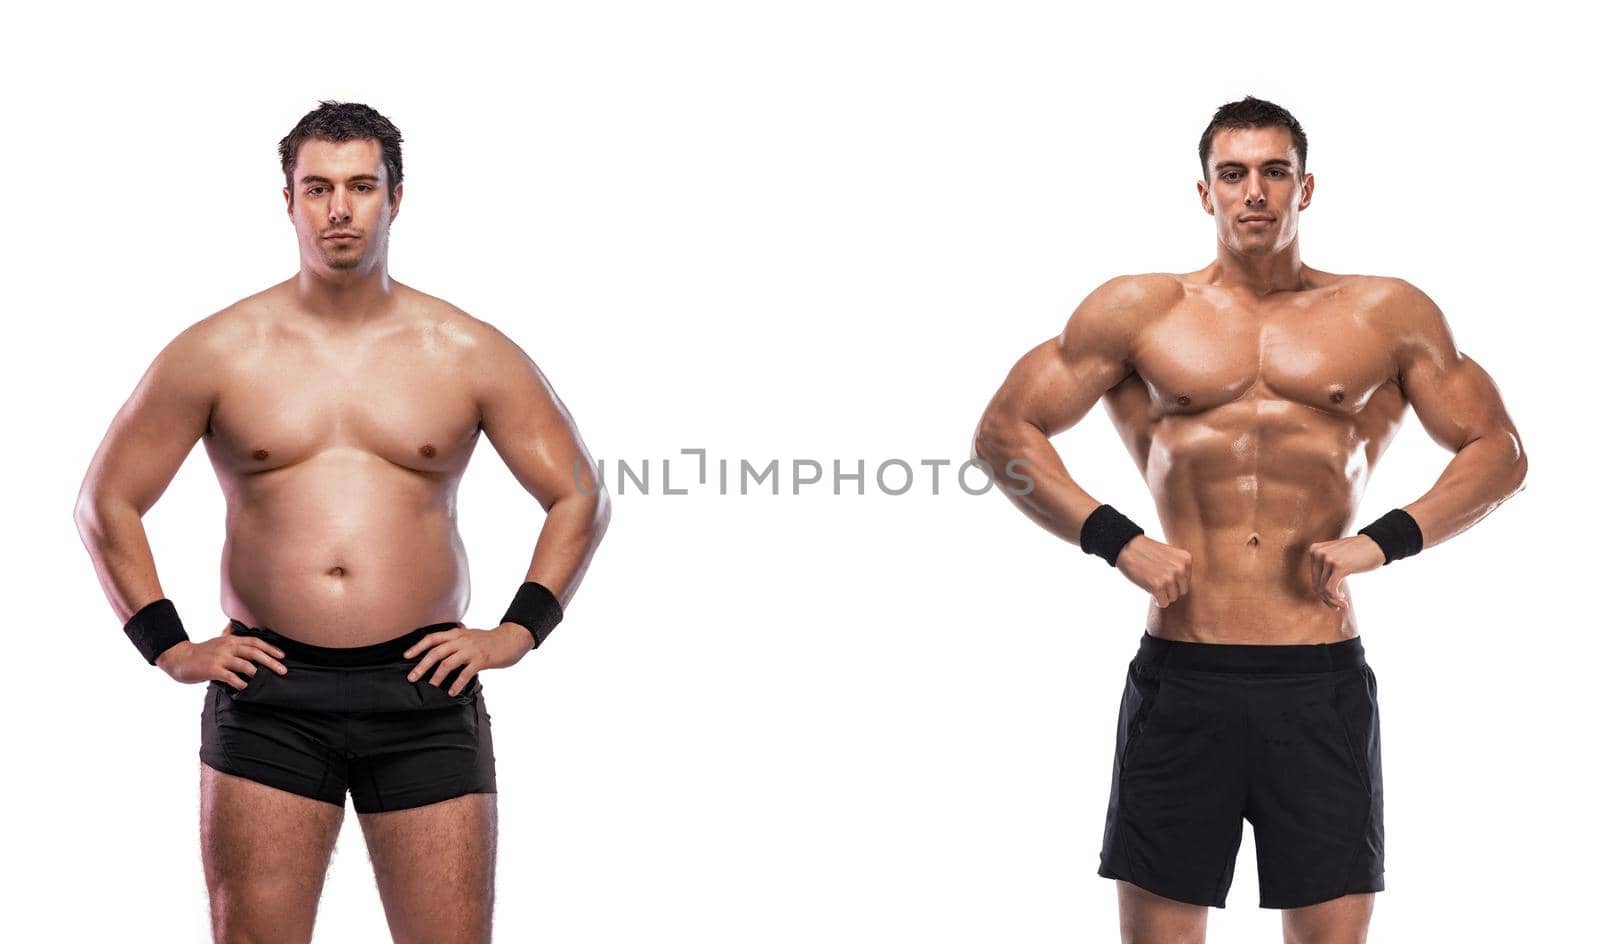 Inspiring Weight-Loss Transformation Before And After. The man was fat but became fit. Fat to athlete.